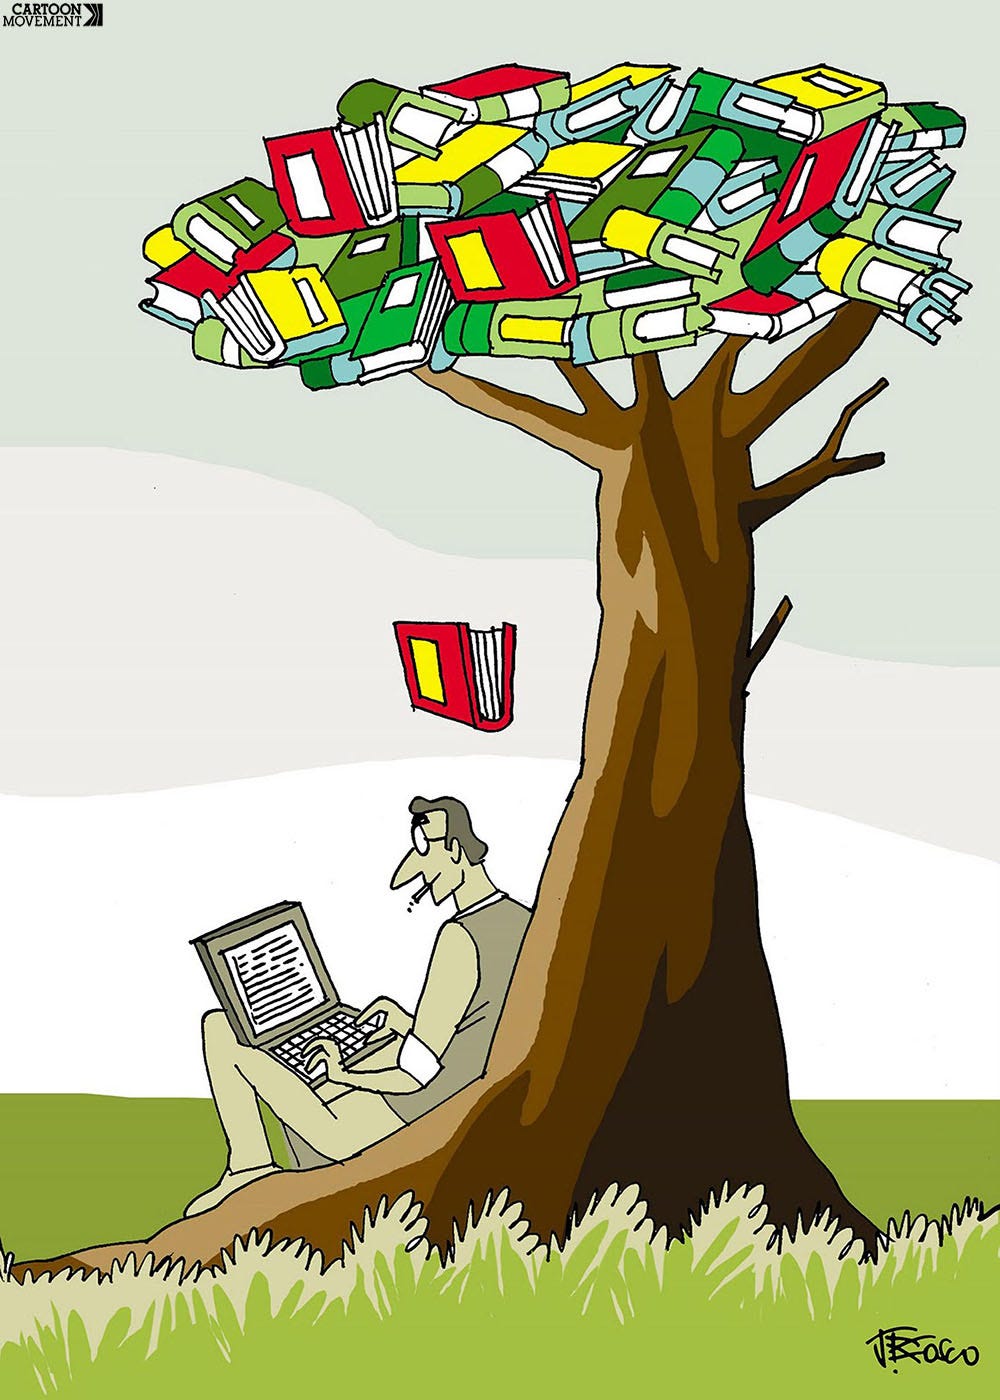 A man sits under a tree working on a computer. The leaves of the tree are made from books. One books is in the process of falling on the man's head.